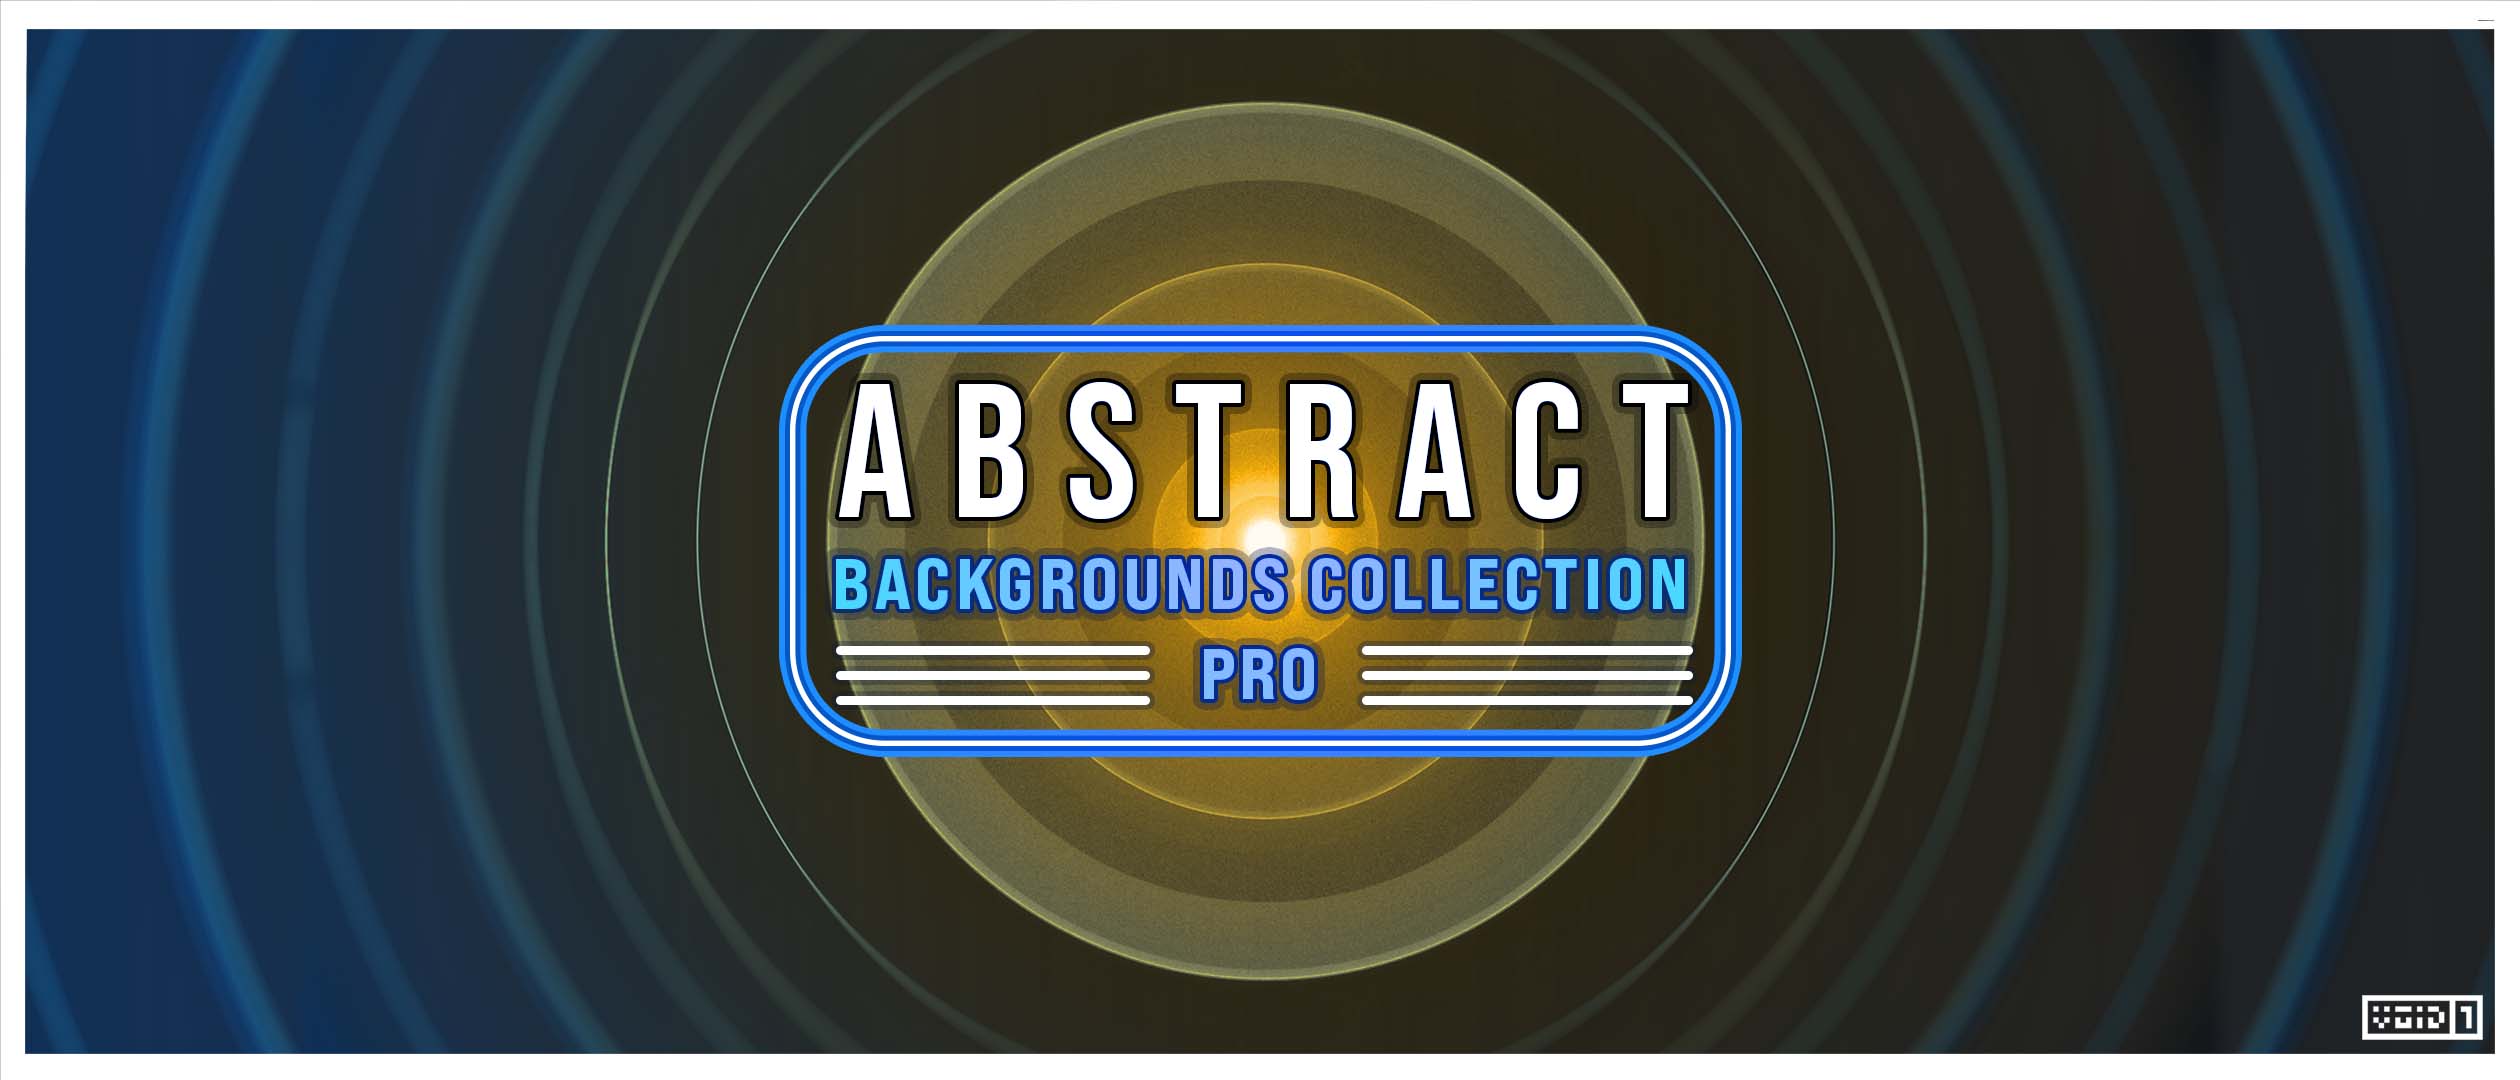 Abstract Backgrounds Collection PRO